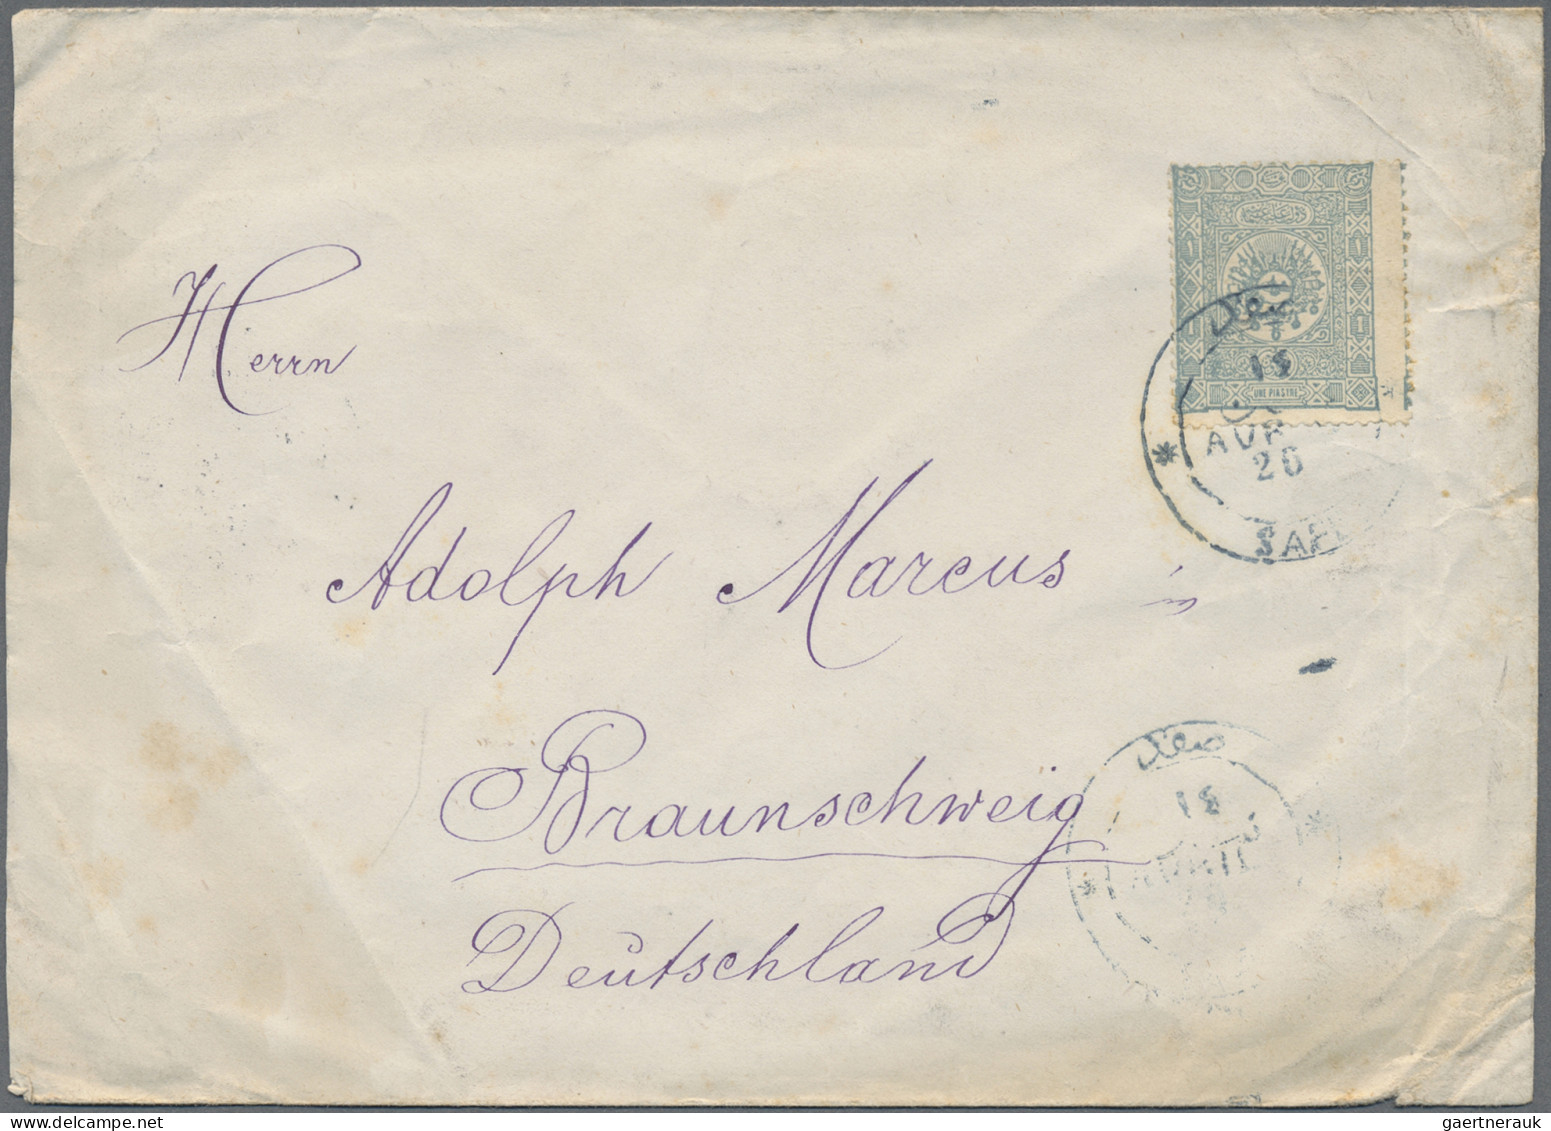 Holy Land: 1892/94 Two Covers From Safed To Braunschweig, Germany Cancelled By B - Palestine